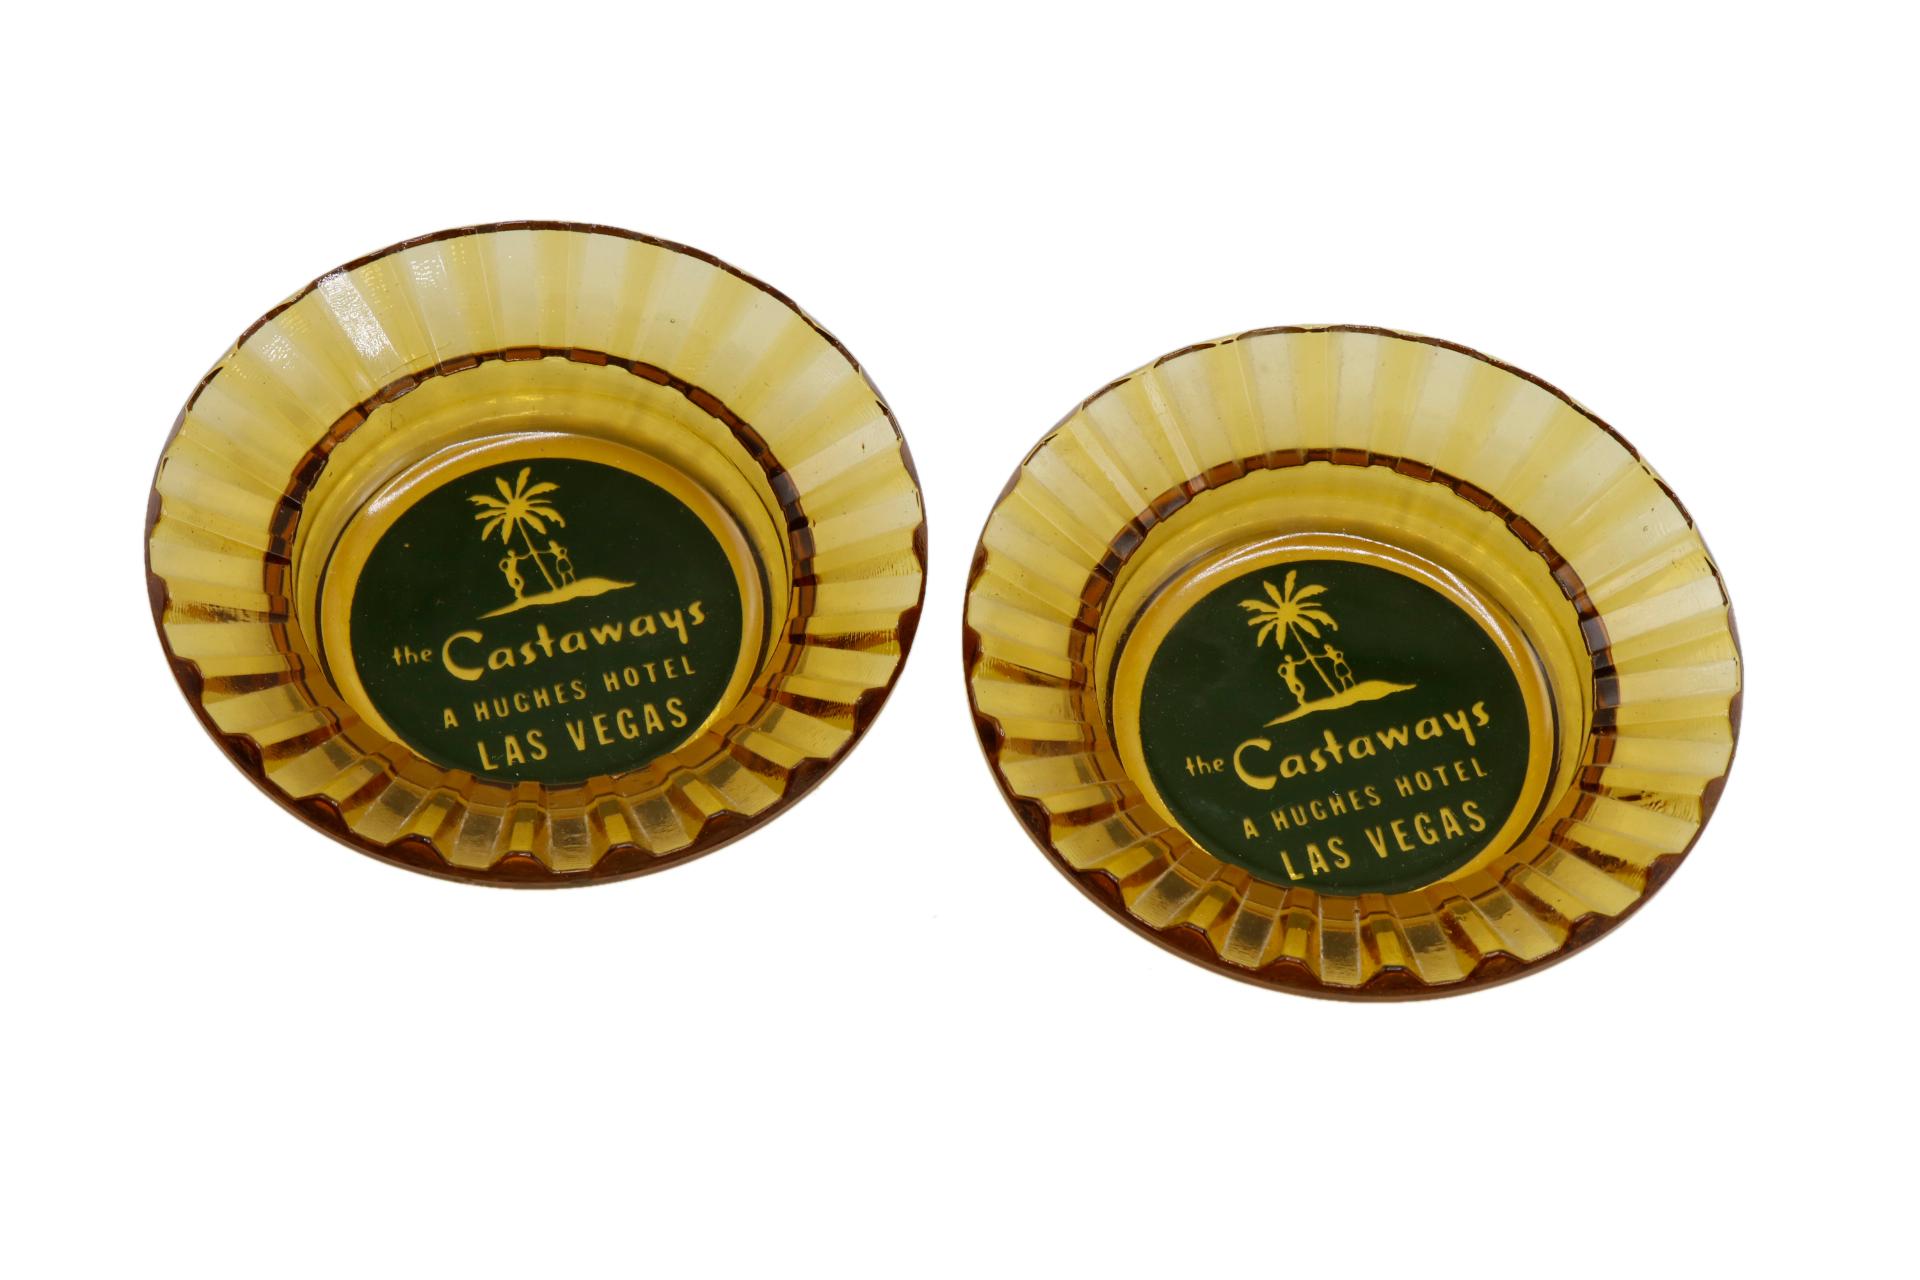 A pair of yellow tinted glass ashtrays from The Castaways Hotel, a hotel and casino in Paradise, Las Vegas, Nevada. The center is printed with a green circle branded with the Castaways logo. The hotel was opened in 1963, purchased in 1967 by